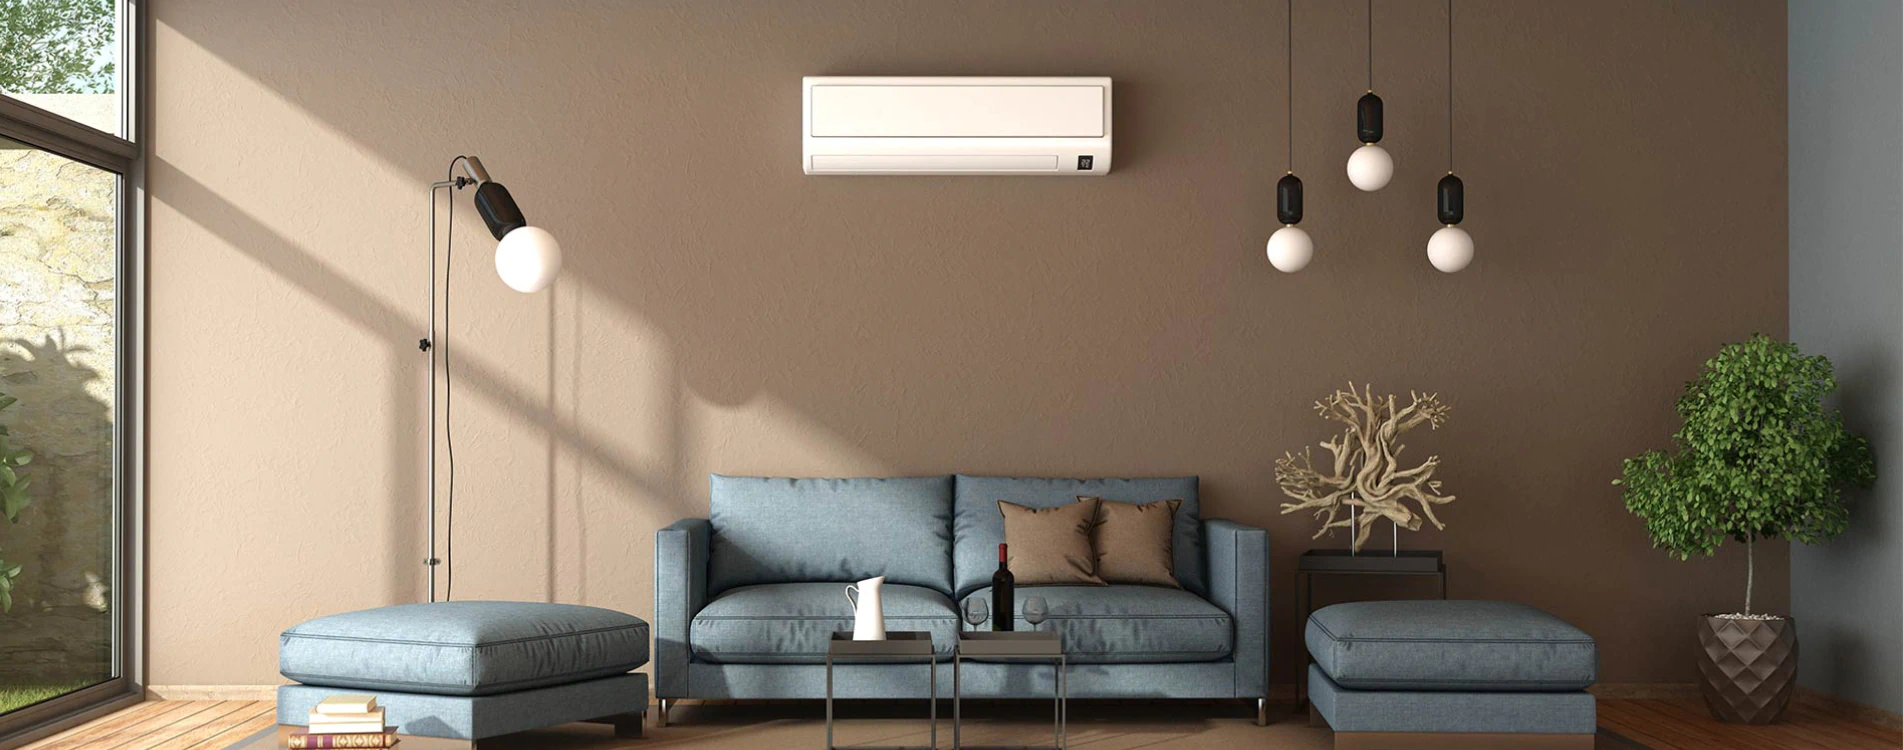 blue and brown living room with air conditioner